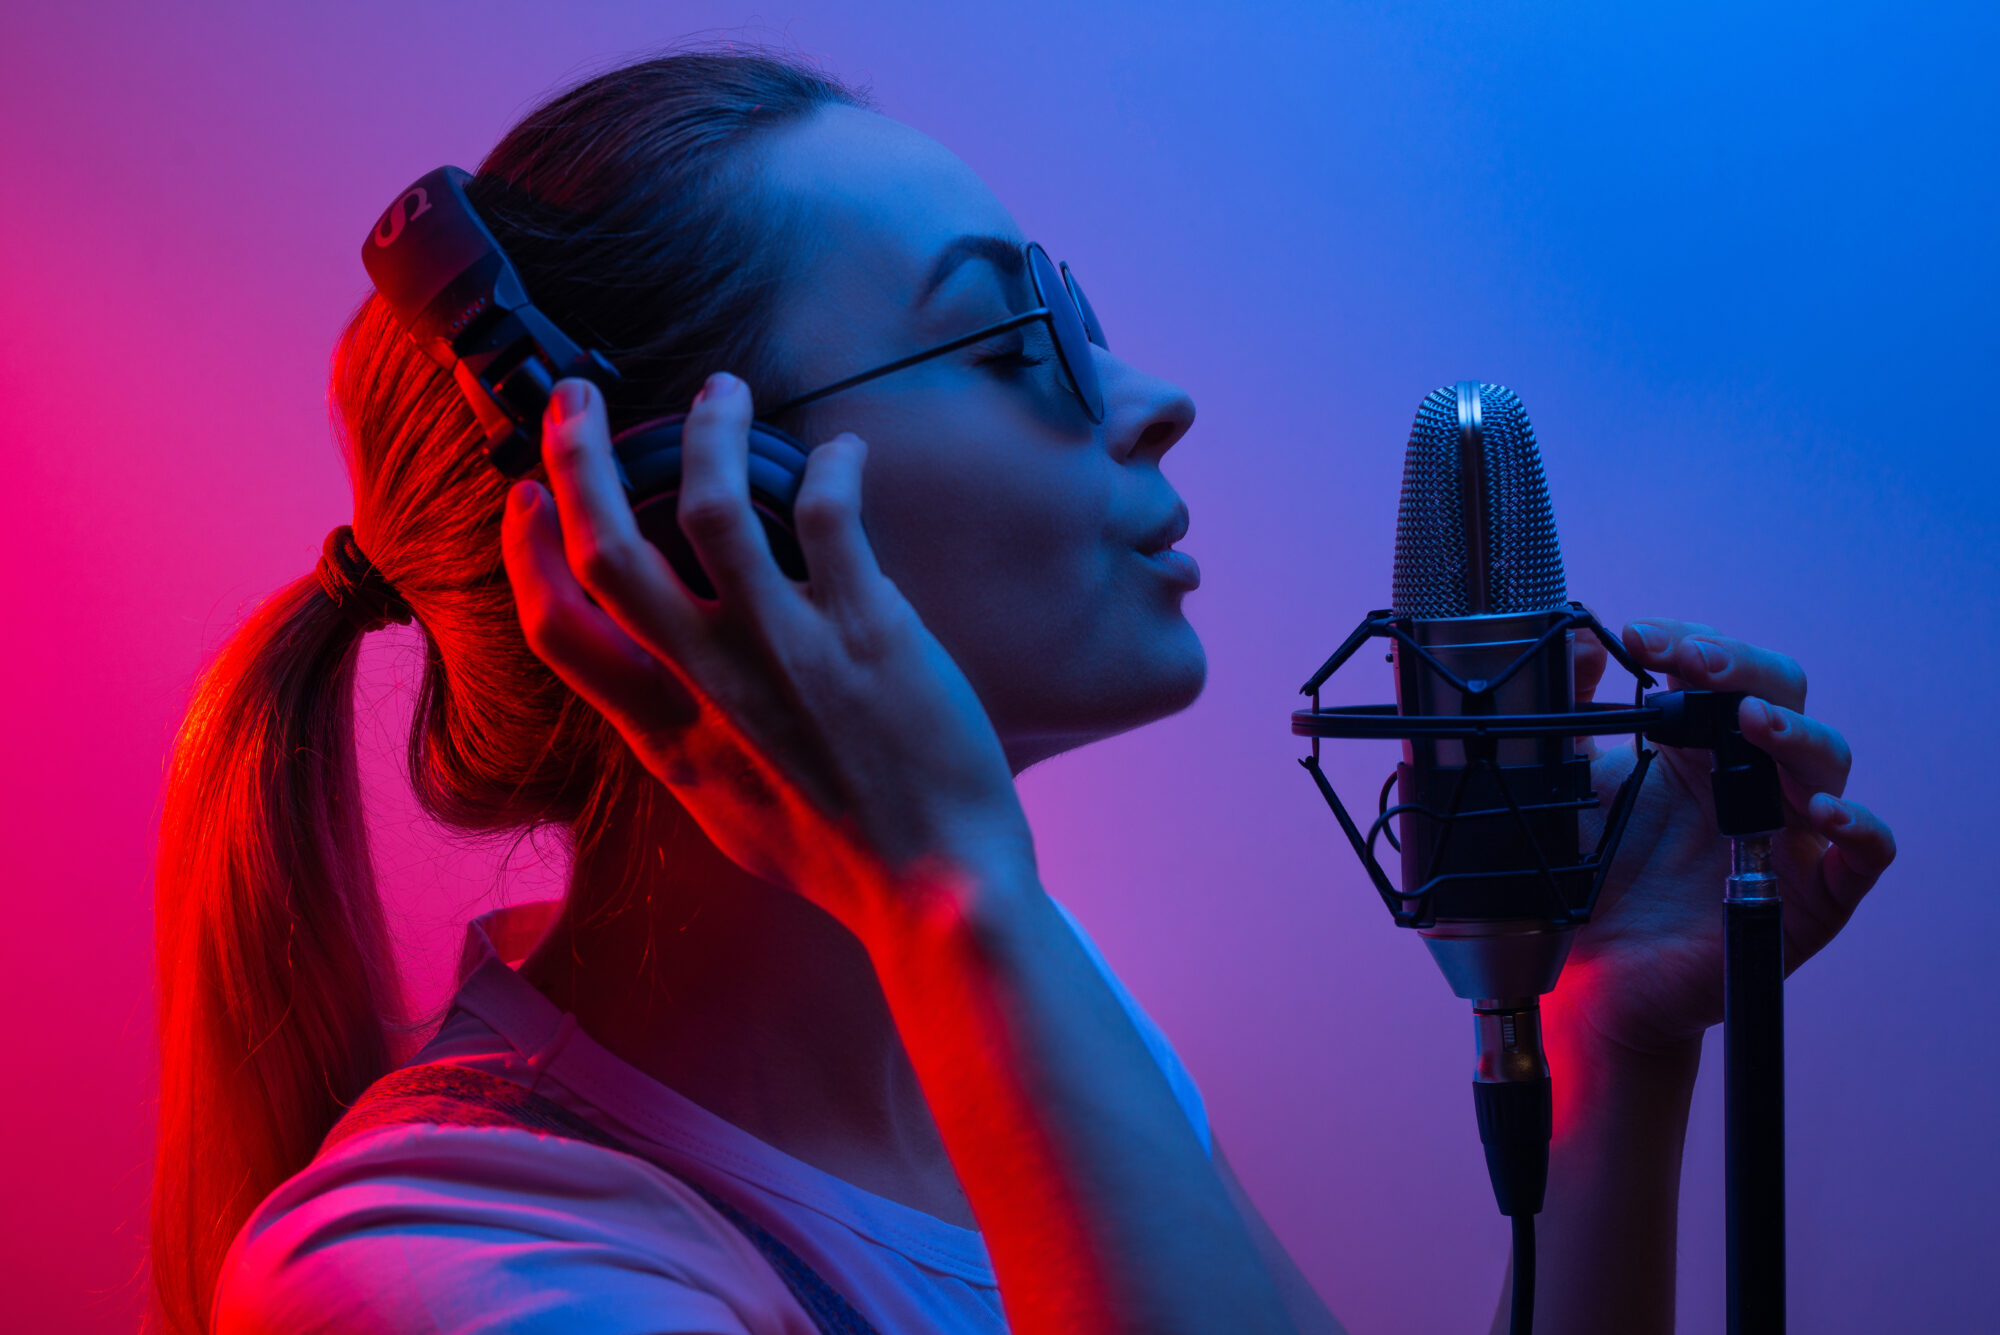 music, show business, people and the voice of a singer or dj with headphones with glasses and a microphone singing a song in the recording studio discoteka, party, light music, party, party, party